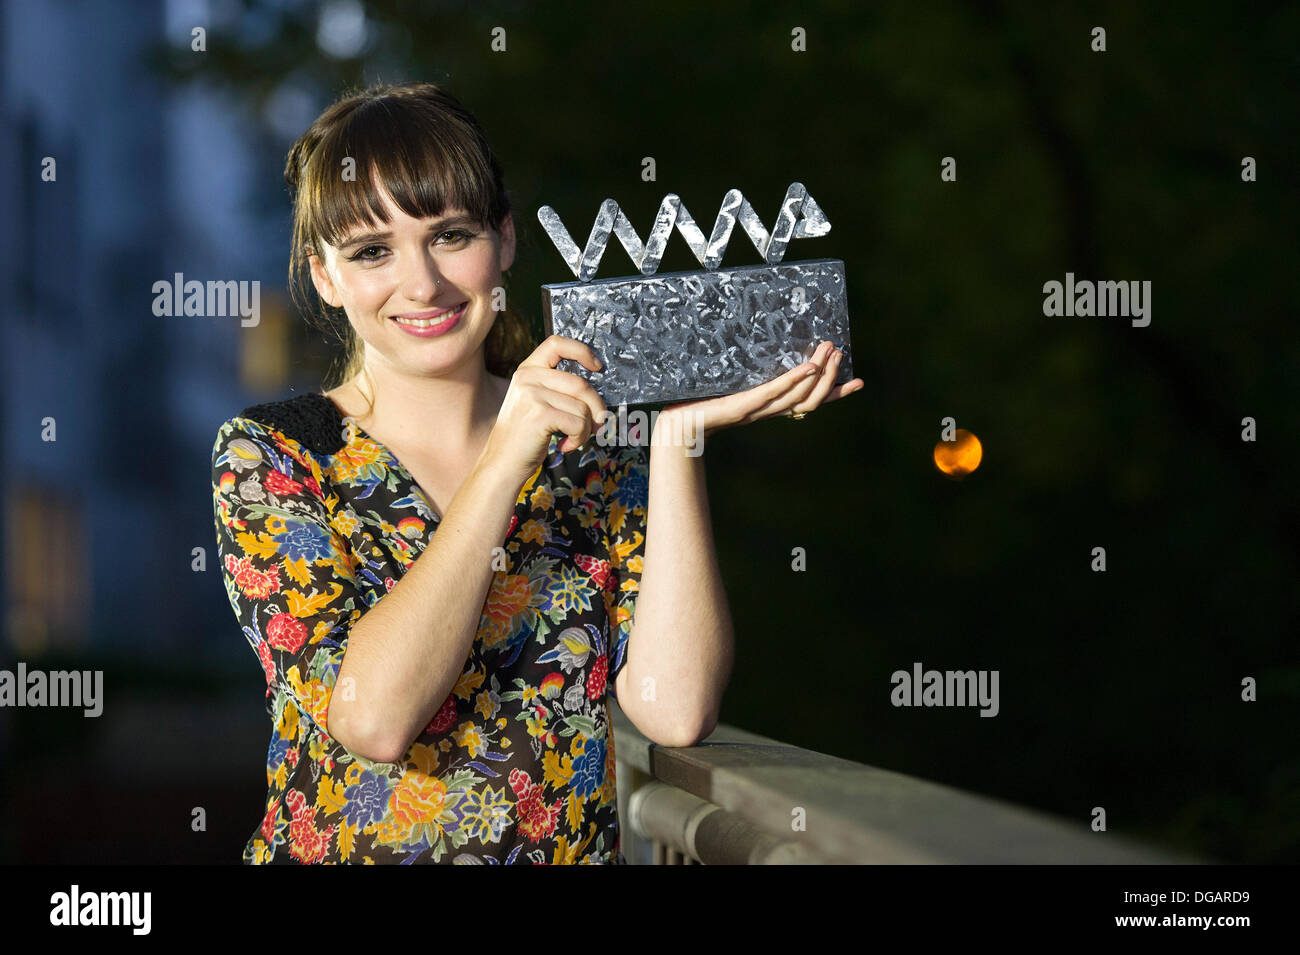 Cardiff, Wales, UK. 17th October 2013.  Georgia Ruth wins the Welsh Music Prize at the Park Plaza, Cardiff. Matthew Horwood/Alamy Live News Stock Photo